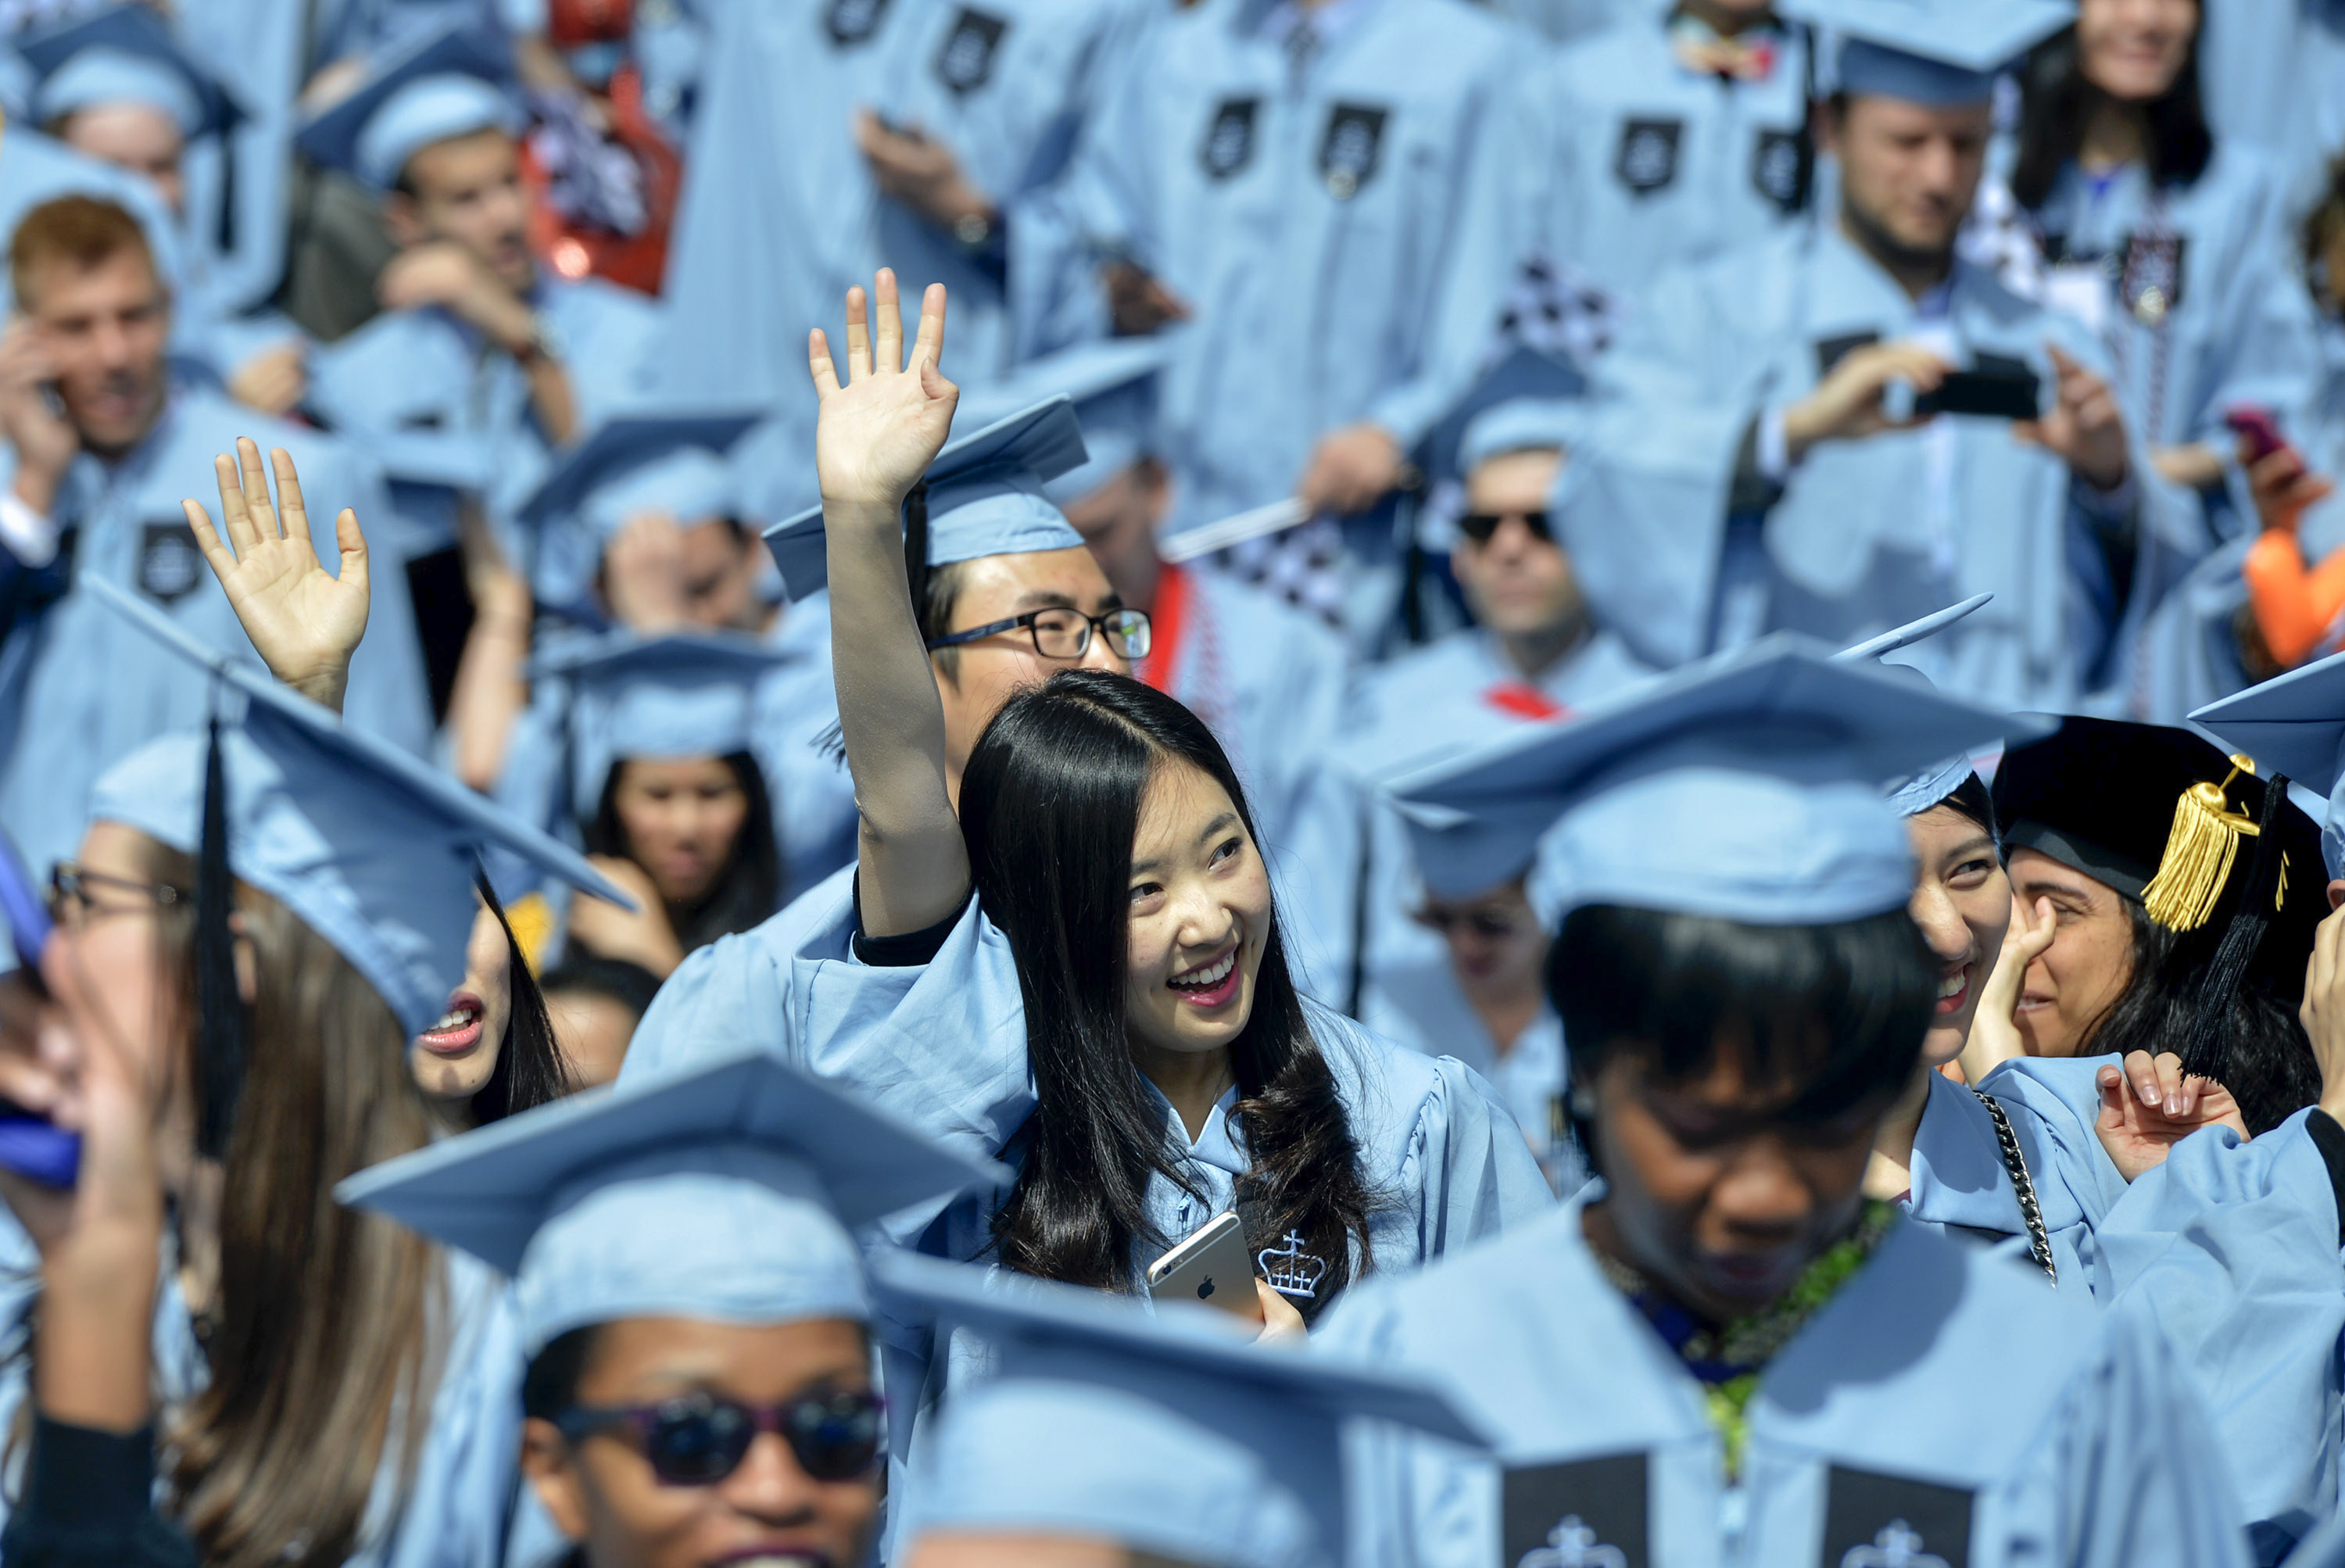 Chinese graduates attend Columbia University’s commencement ceremony in New York in May 2015. Photo: Xinhua